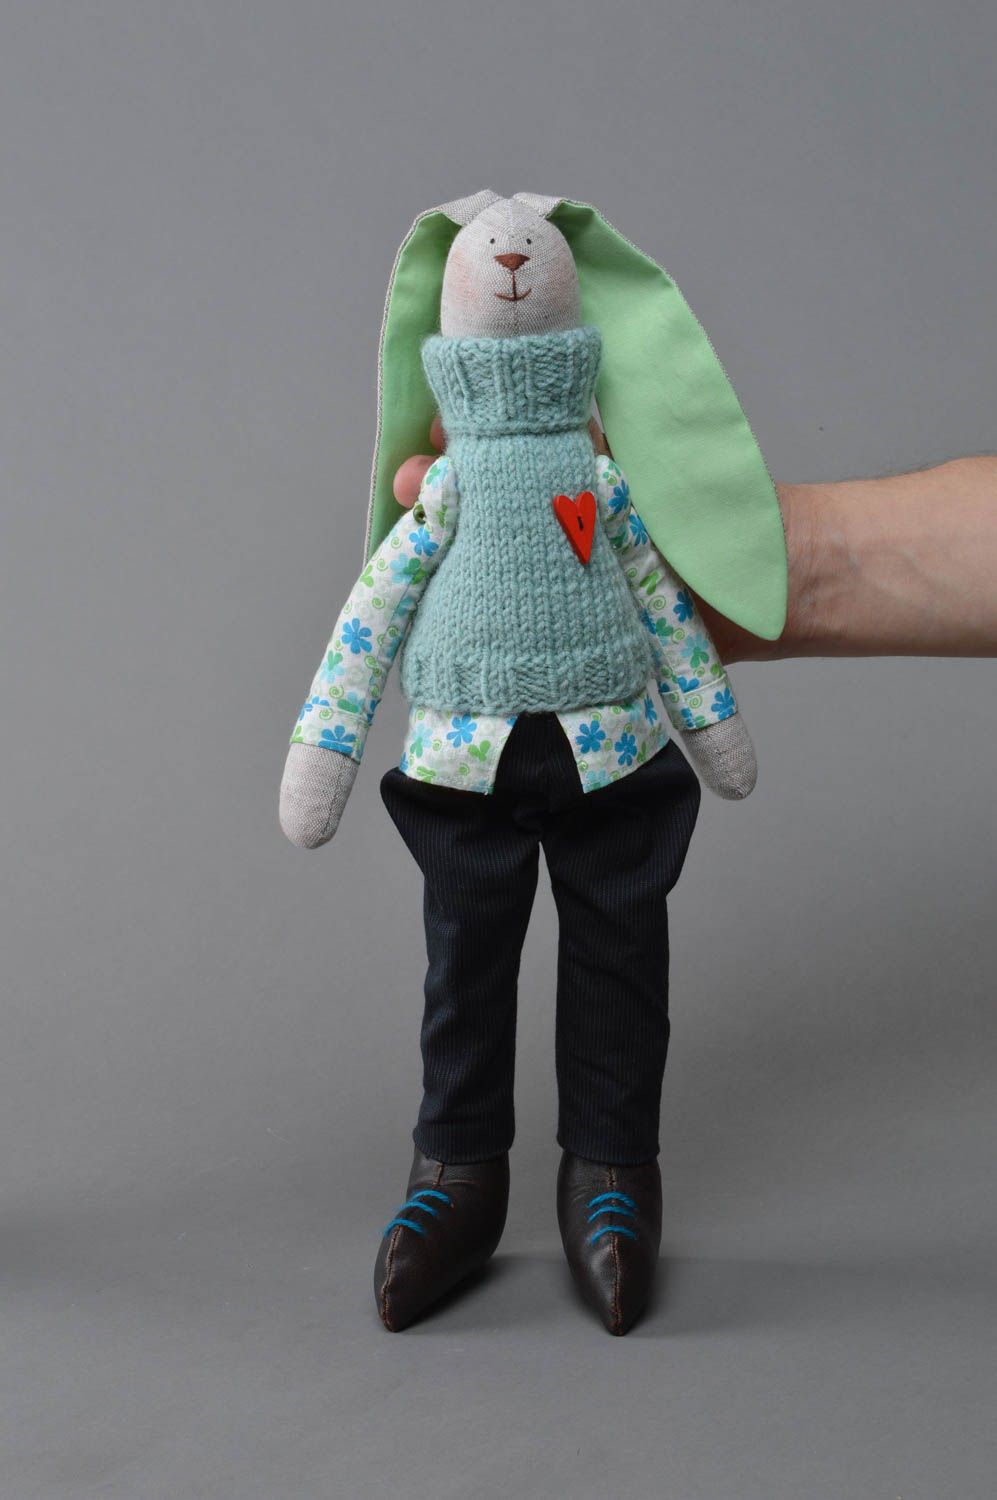 Handmade decorative soft toy bunny made of flax in knitted vest designer doll photo 1